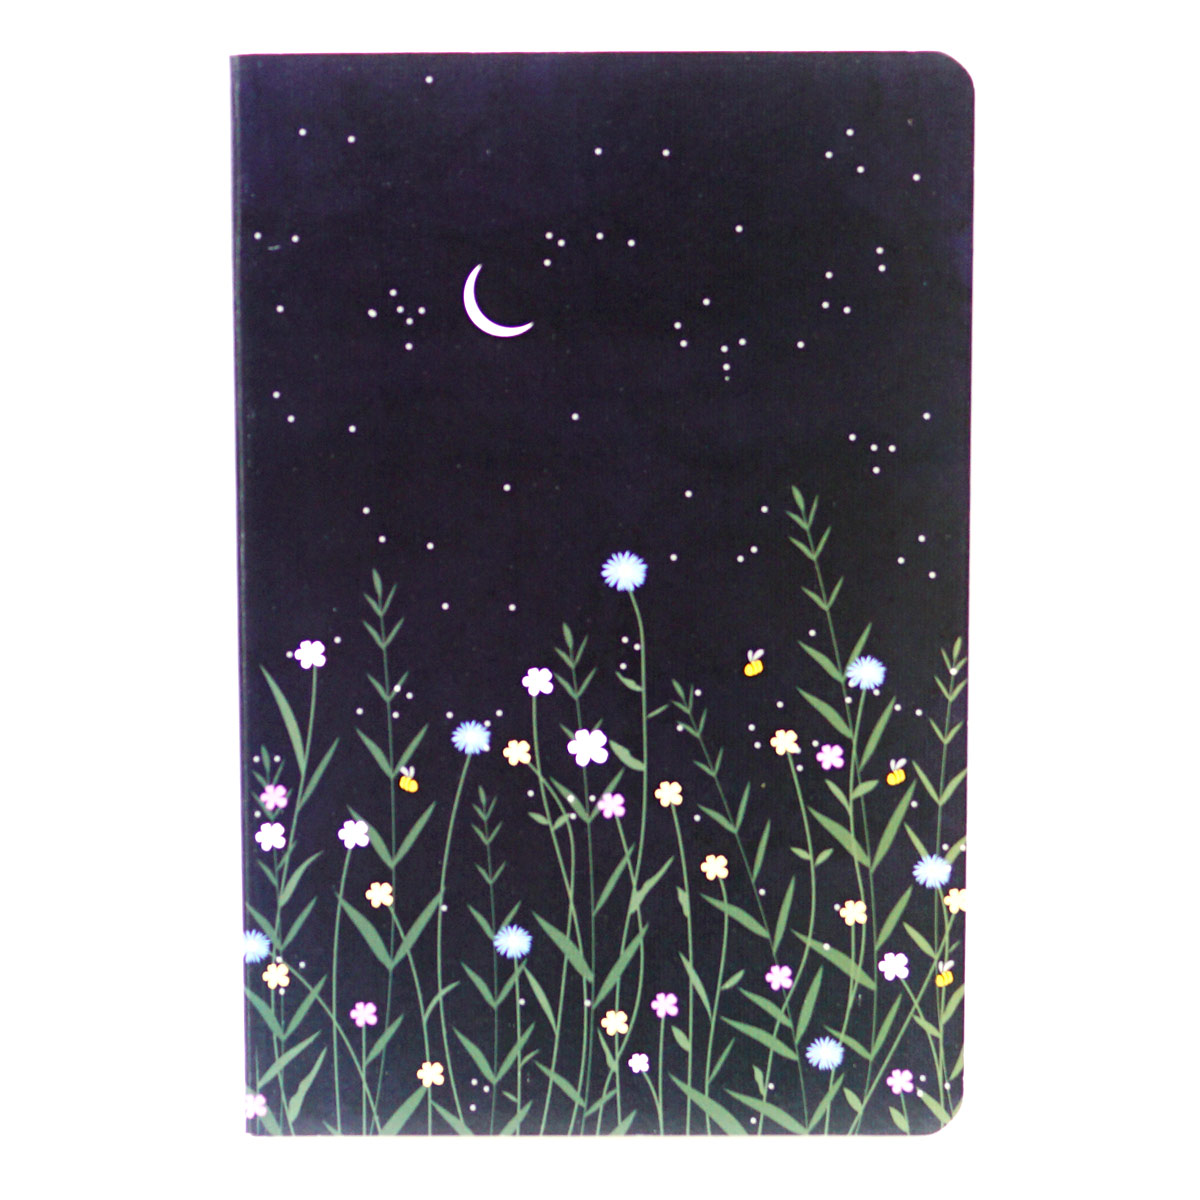 Factor A5 Black Color with Half Moon and Plant Design Soft Bound Ruled Notebook 90 GSM With 160 Pages SKU 50219